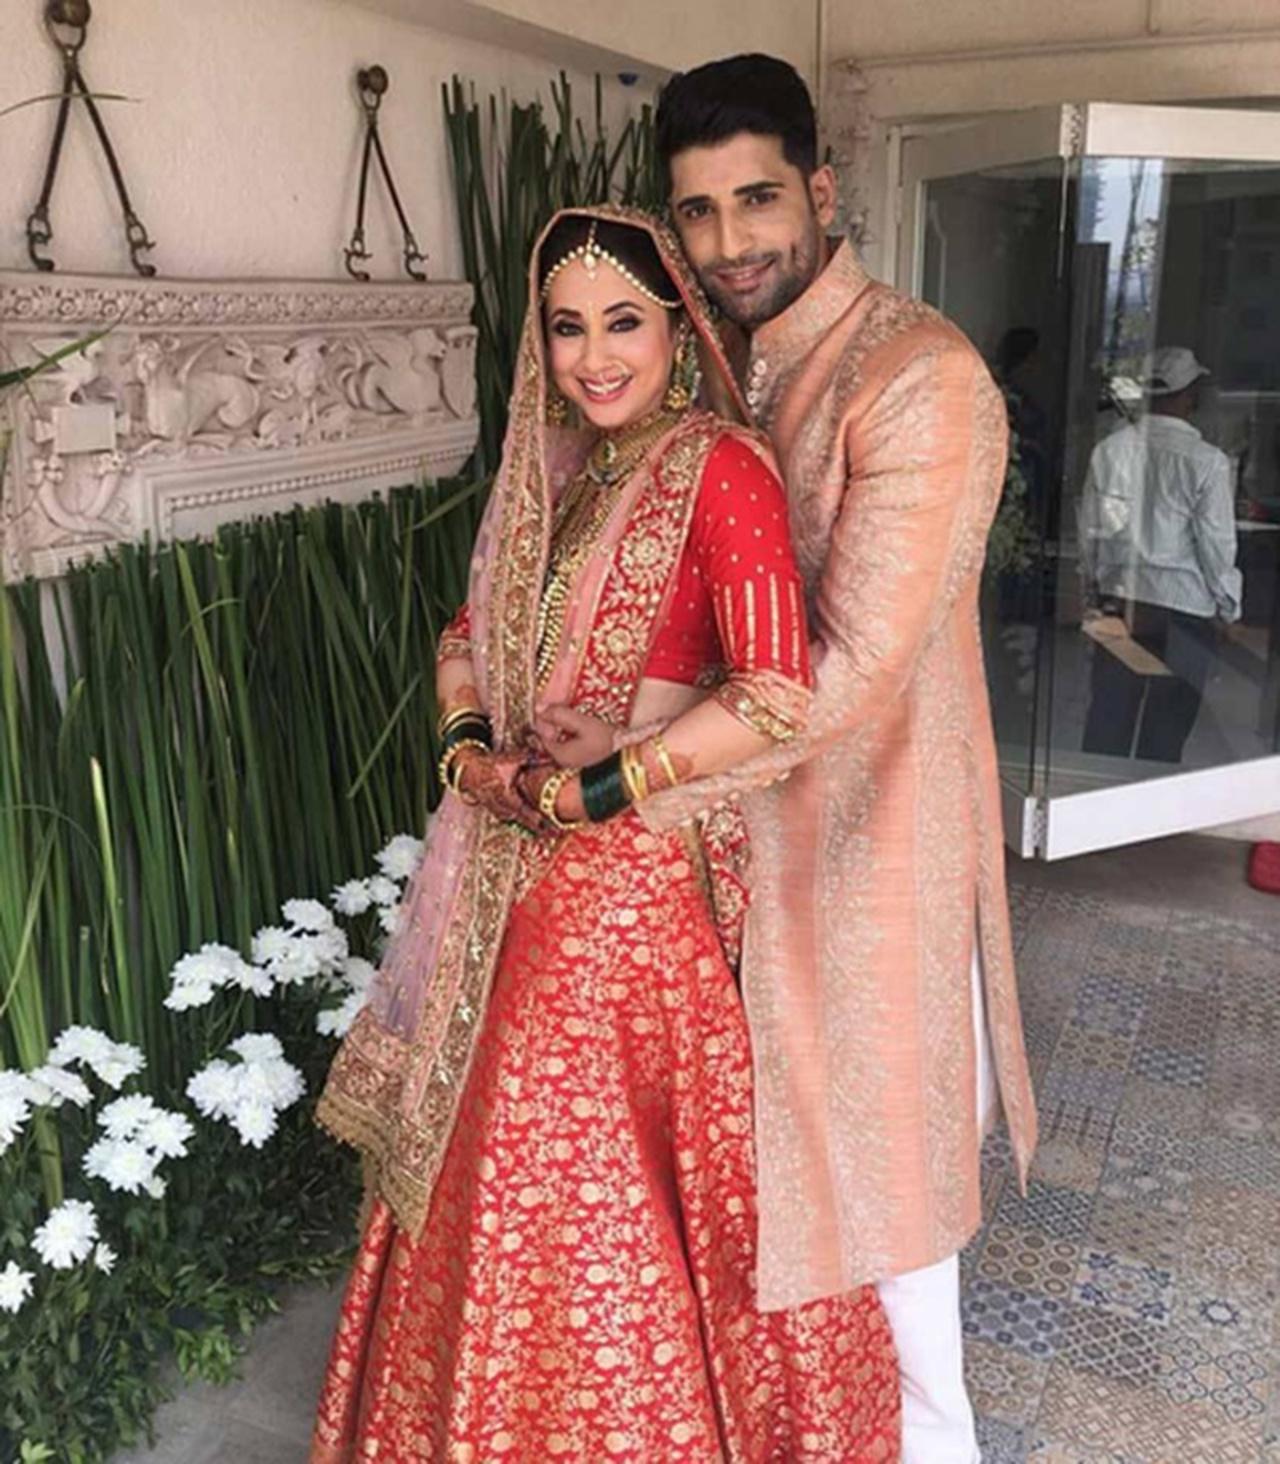 Urmila Matondkar
Kiara Advani was not the only bride who was decked up in Manish Malhotra. Urmila Matondar also chose the luxury designer's bridal couture for her low-key wedding. She wore a red and gold silk lehenga with roses embroidered on the hem